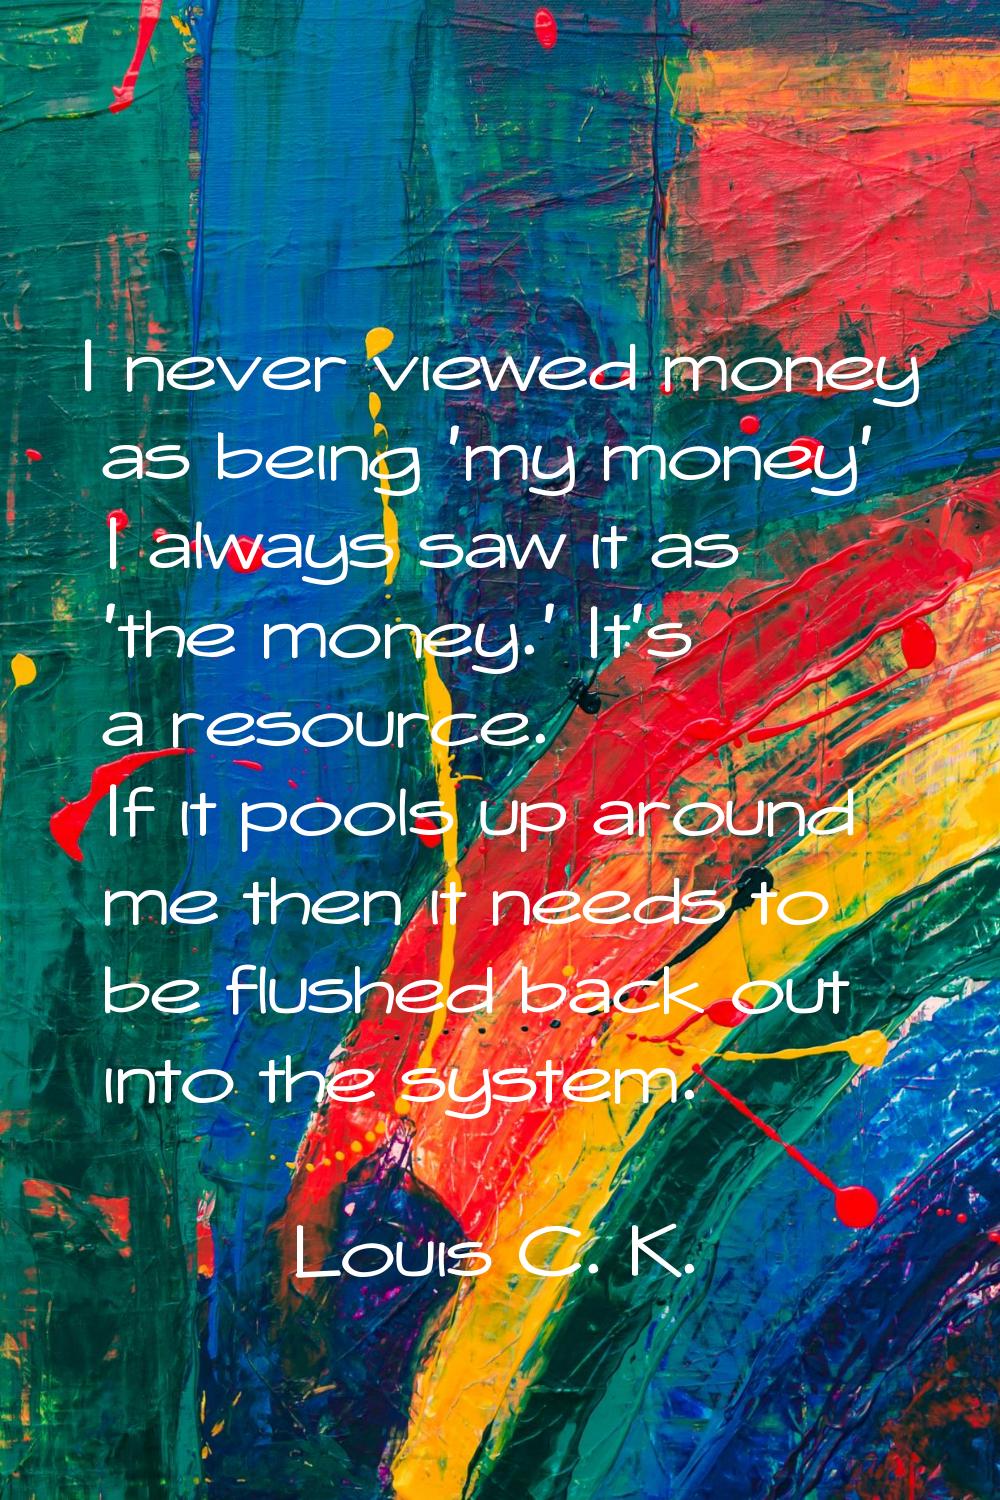 I never viewed money as being 'my money' I always saw it as 'the money.' It's a resource. If it poo